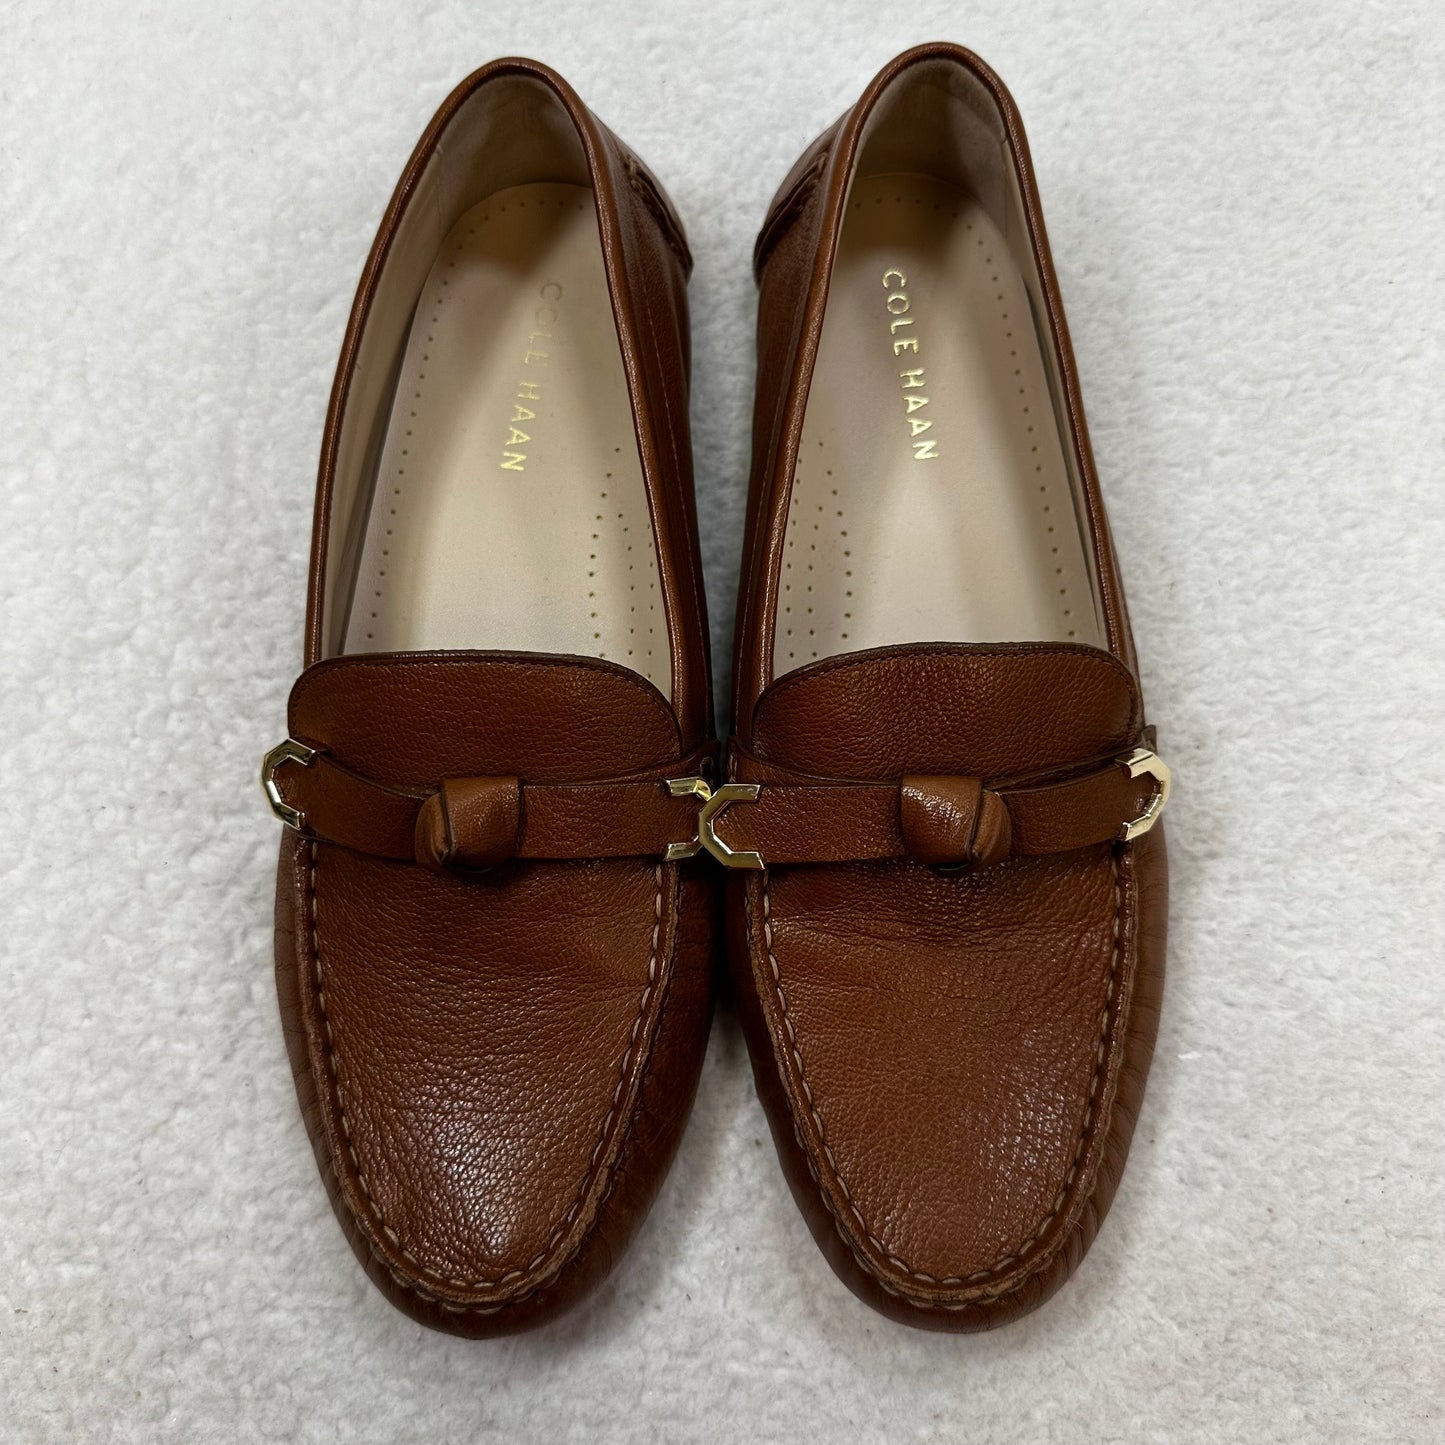 Tan Shoes Flats Loafer Oxford Cole-haan O, Size 9.5